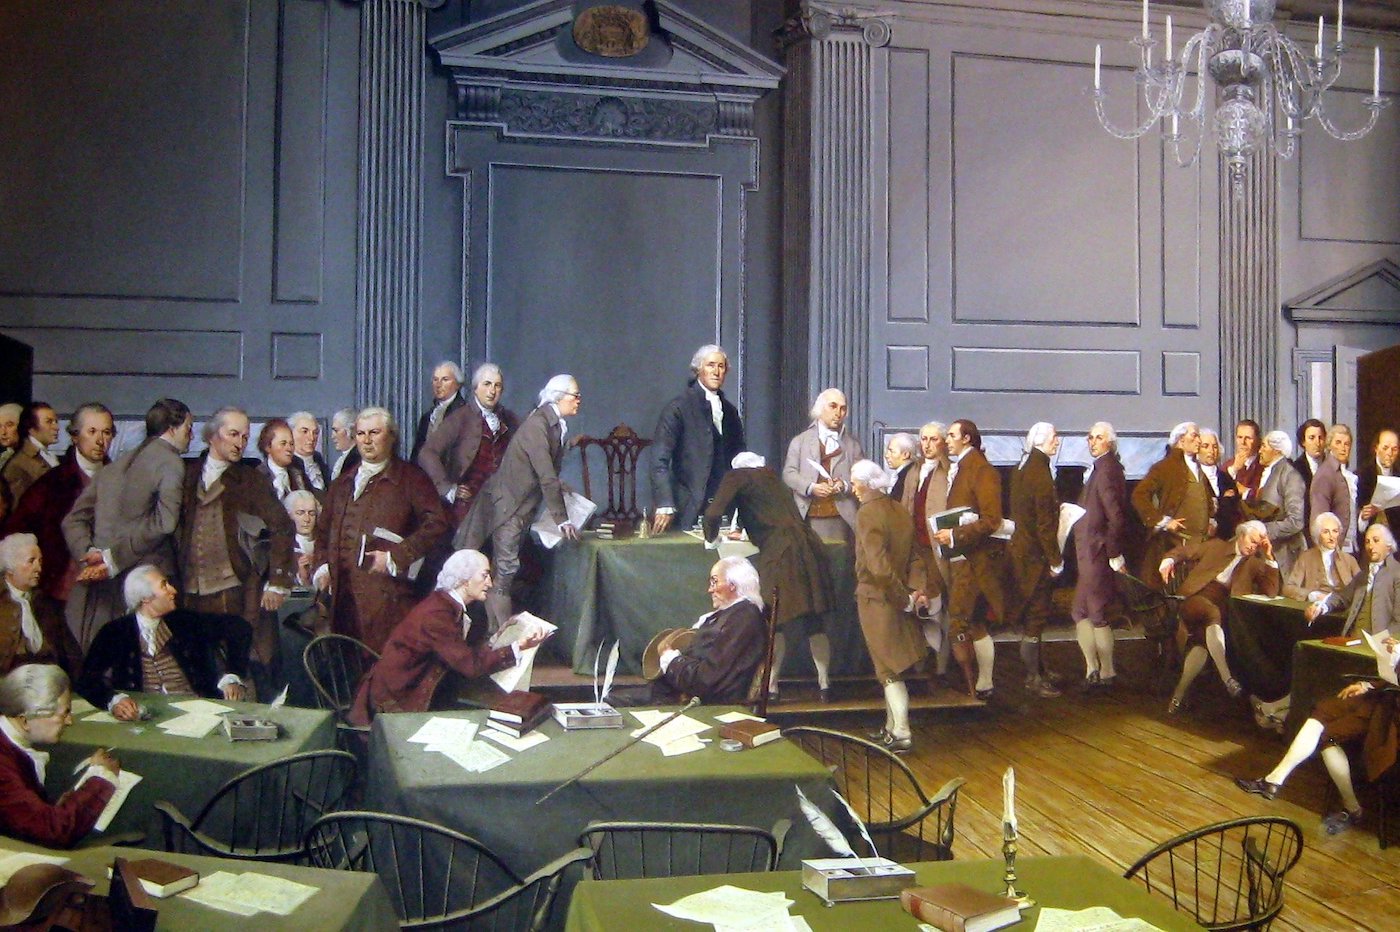 Painting of the signing of the Constitution in Independence Hall